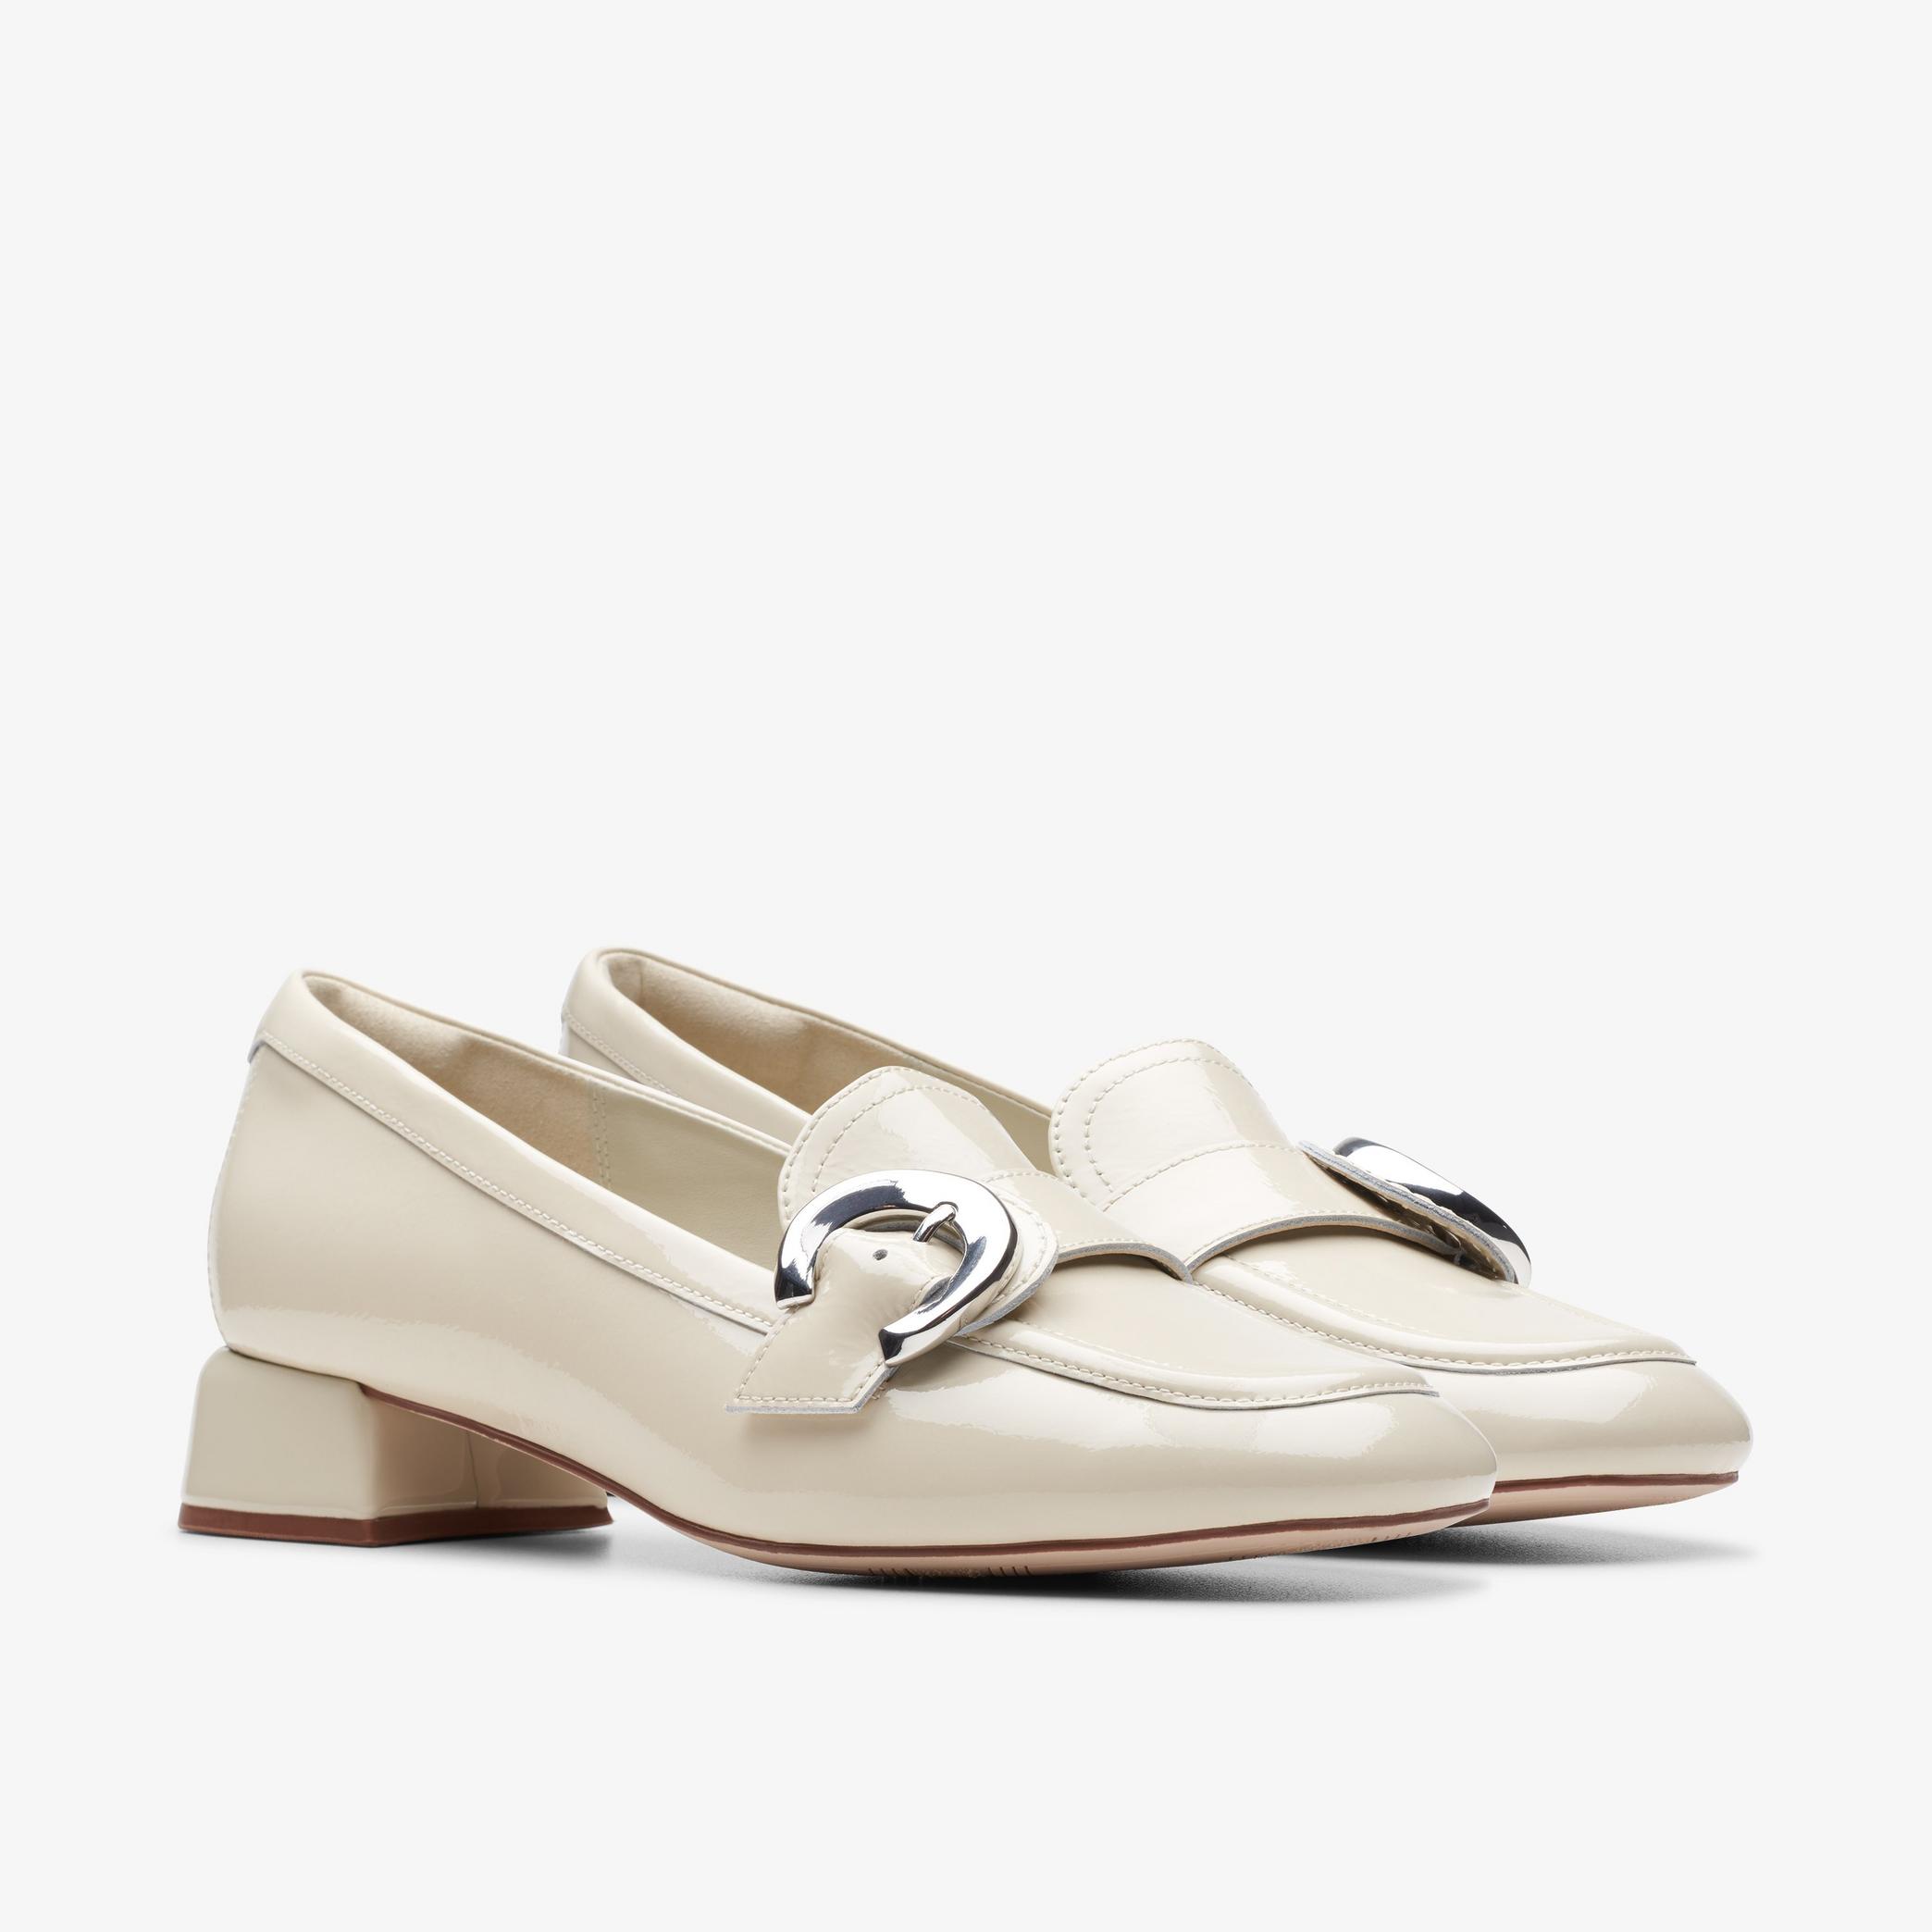 Daiss 30 Trim Ivory Loafers, view 5 of 8